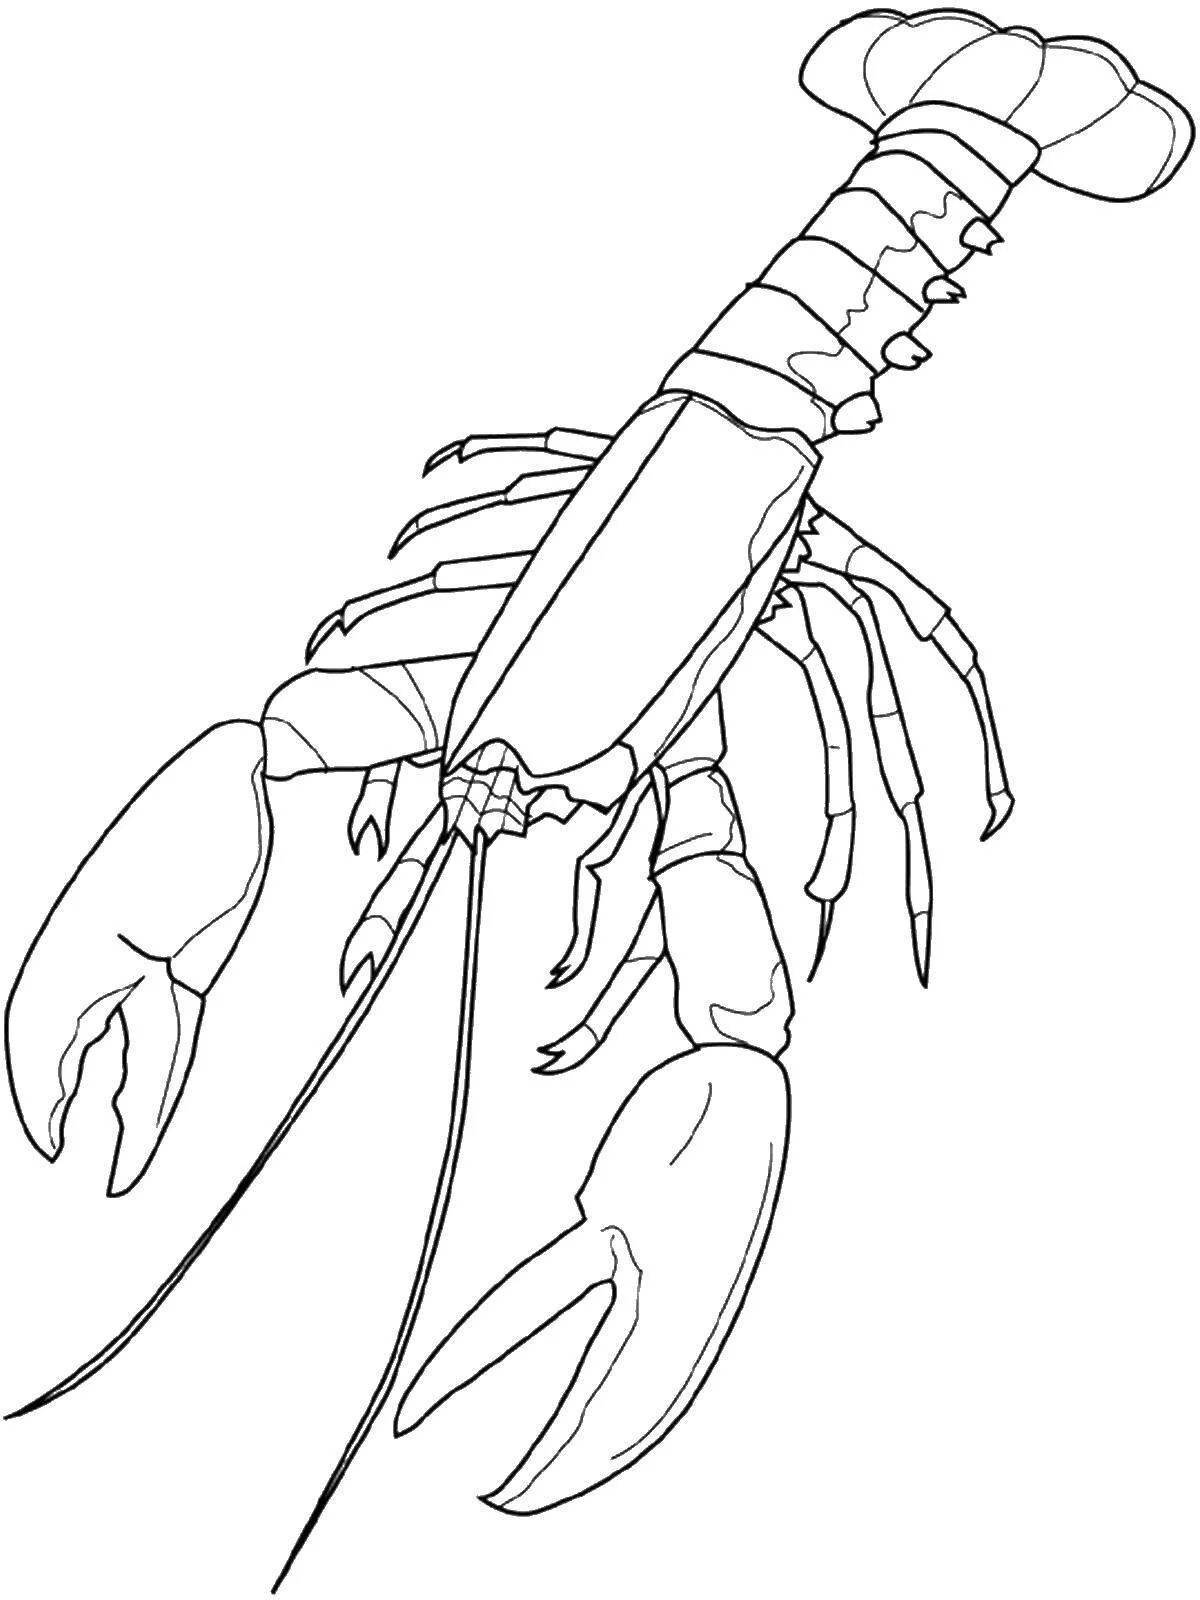 Exciting lobster coloring page